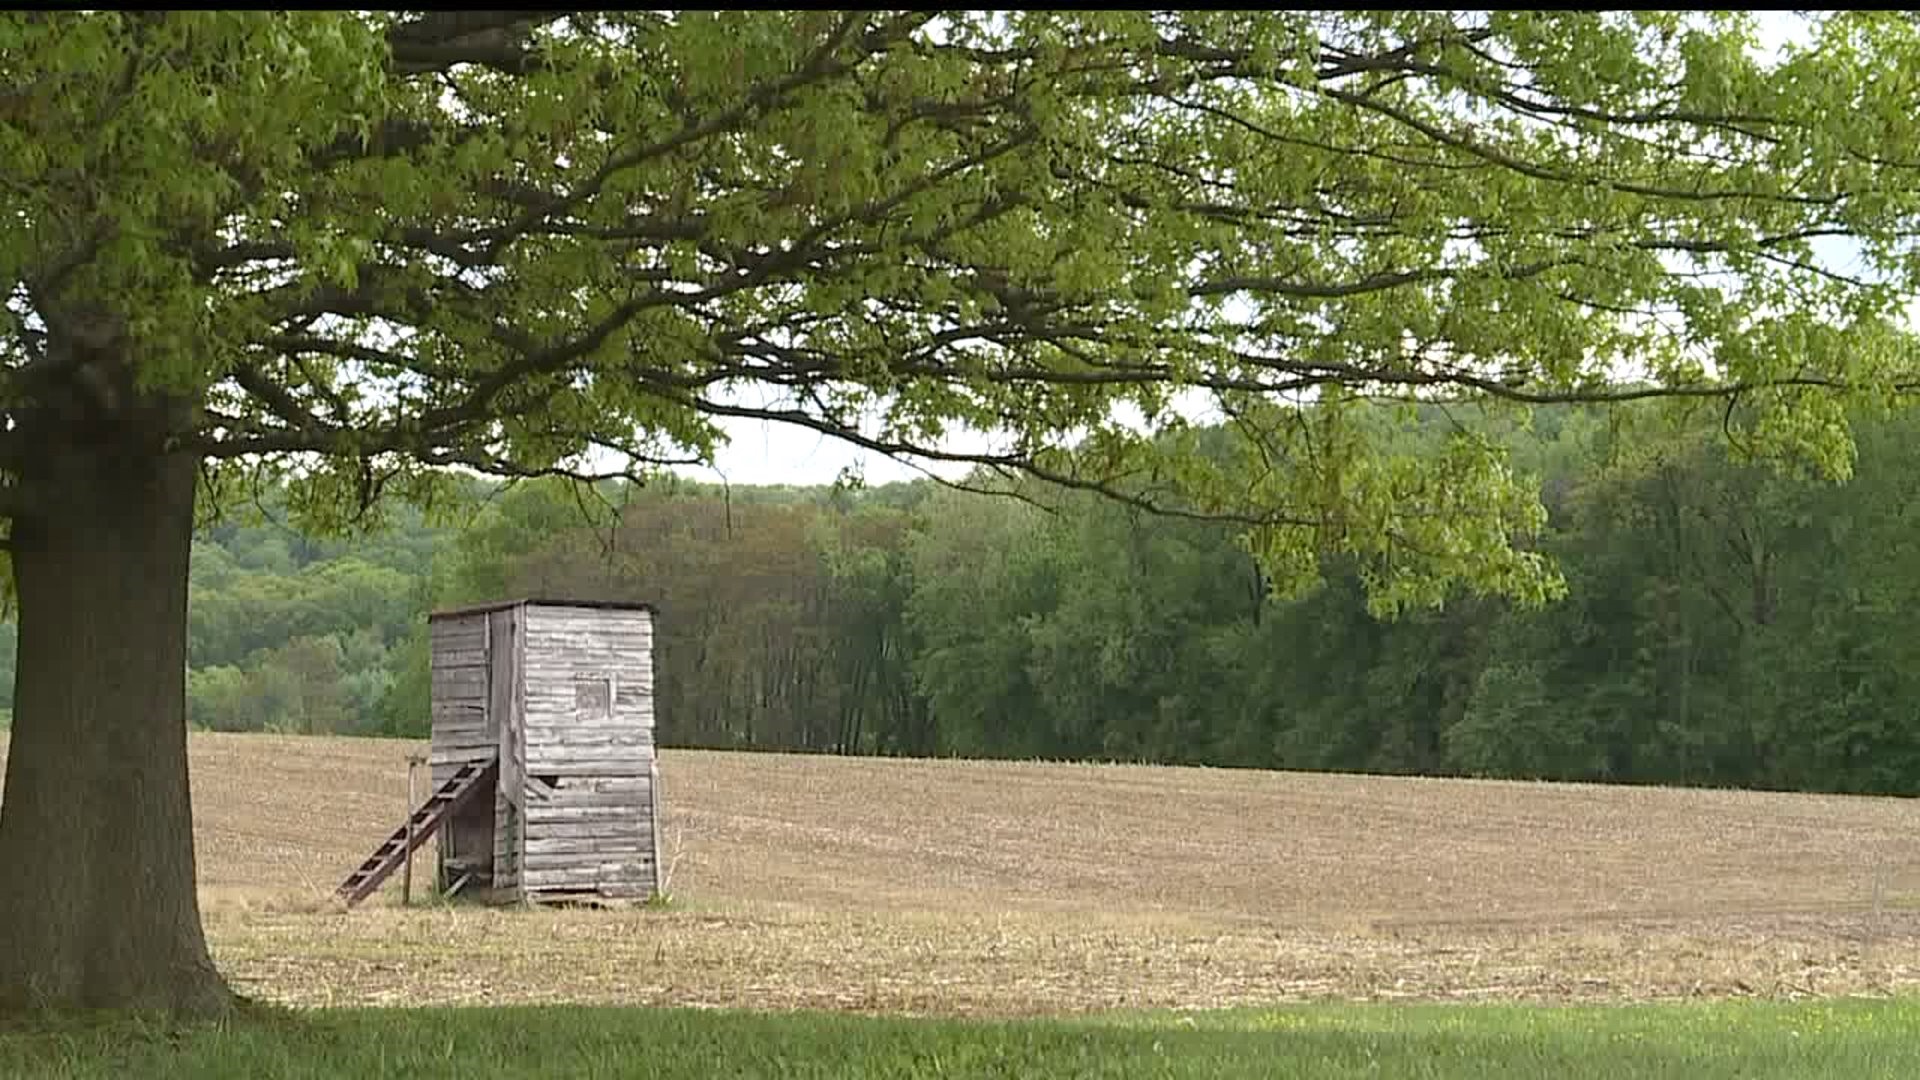 Lancaster County authorities working to identify human remains that were found over the weekend